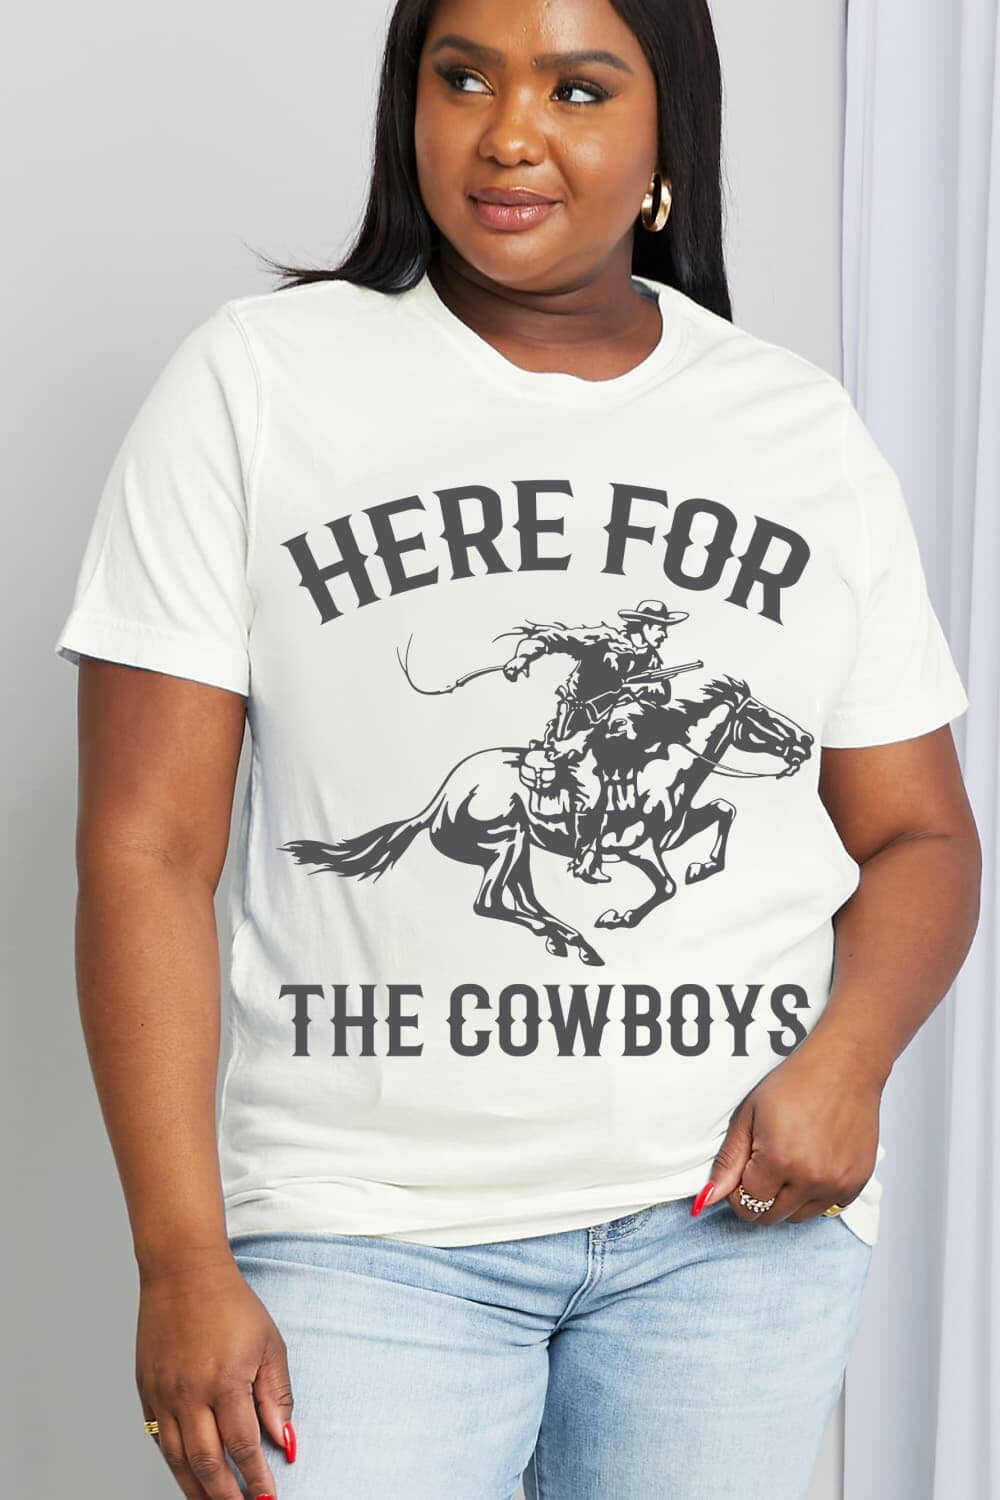 HERE FOR THE COWBOYS Women's Graphic Cotton Tee - Sydney So Sweet